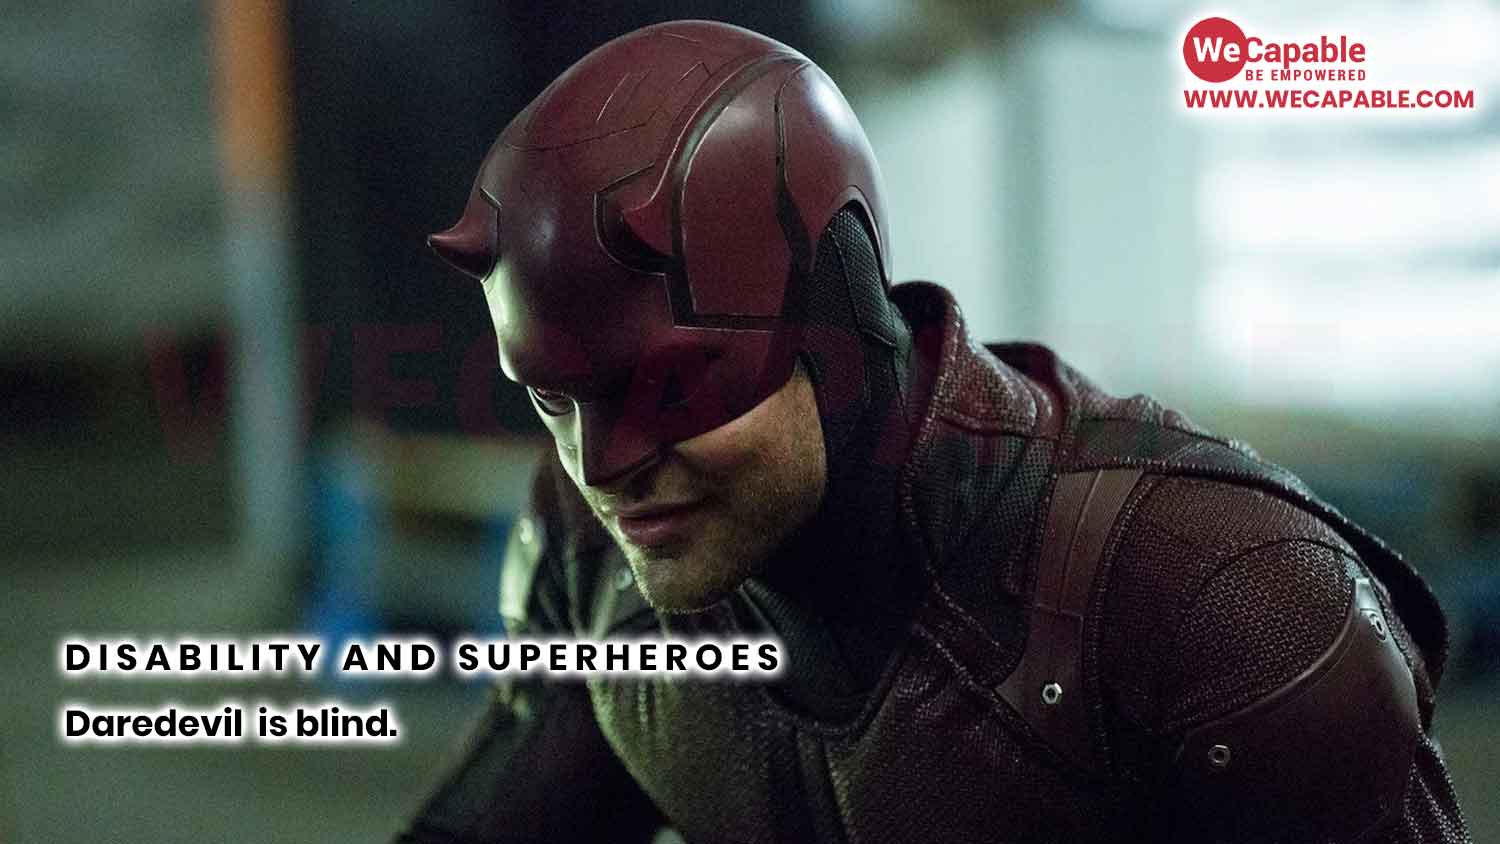 Superhero Daredevil has a disability. He is blind.